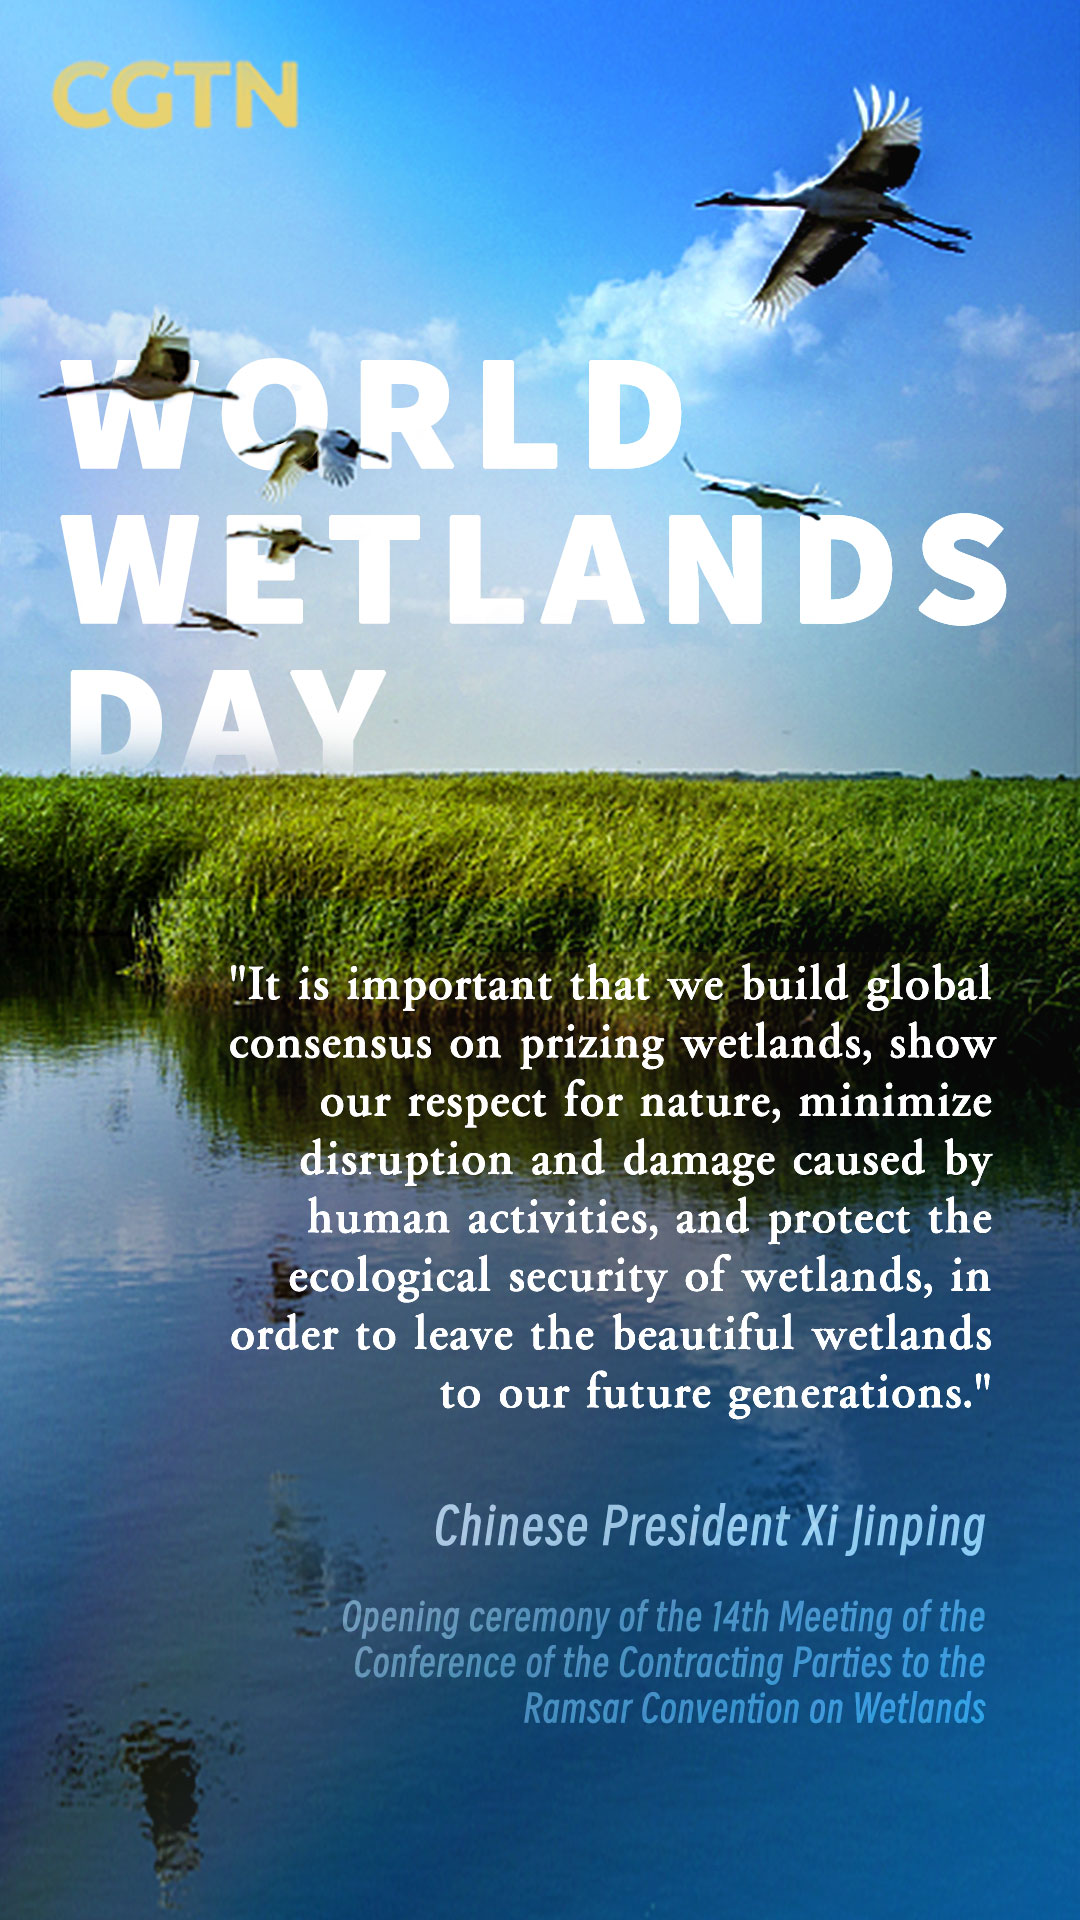 Remarks by Chinese President Xi Jinping at the opening ceremony of the 14th Meeting of the Conference of the Contracting Parties to the Ramsar Convention on Wetlands /Poster by CGTN